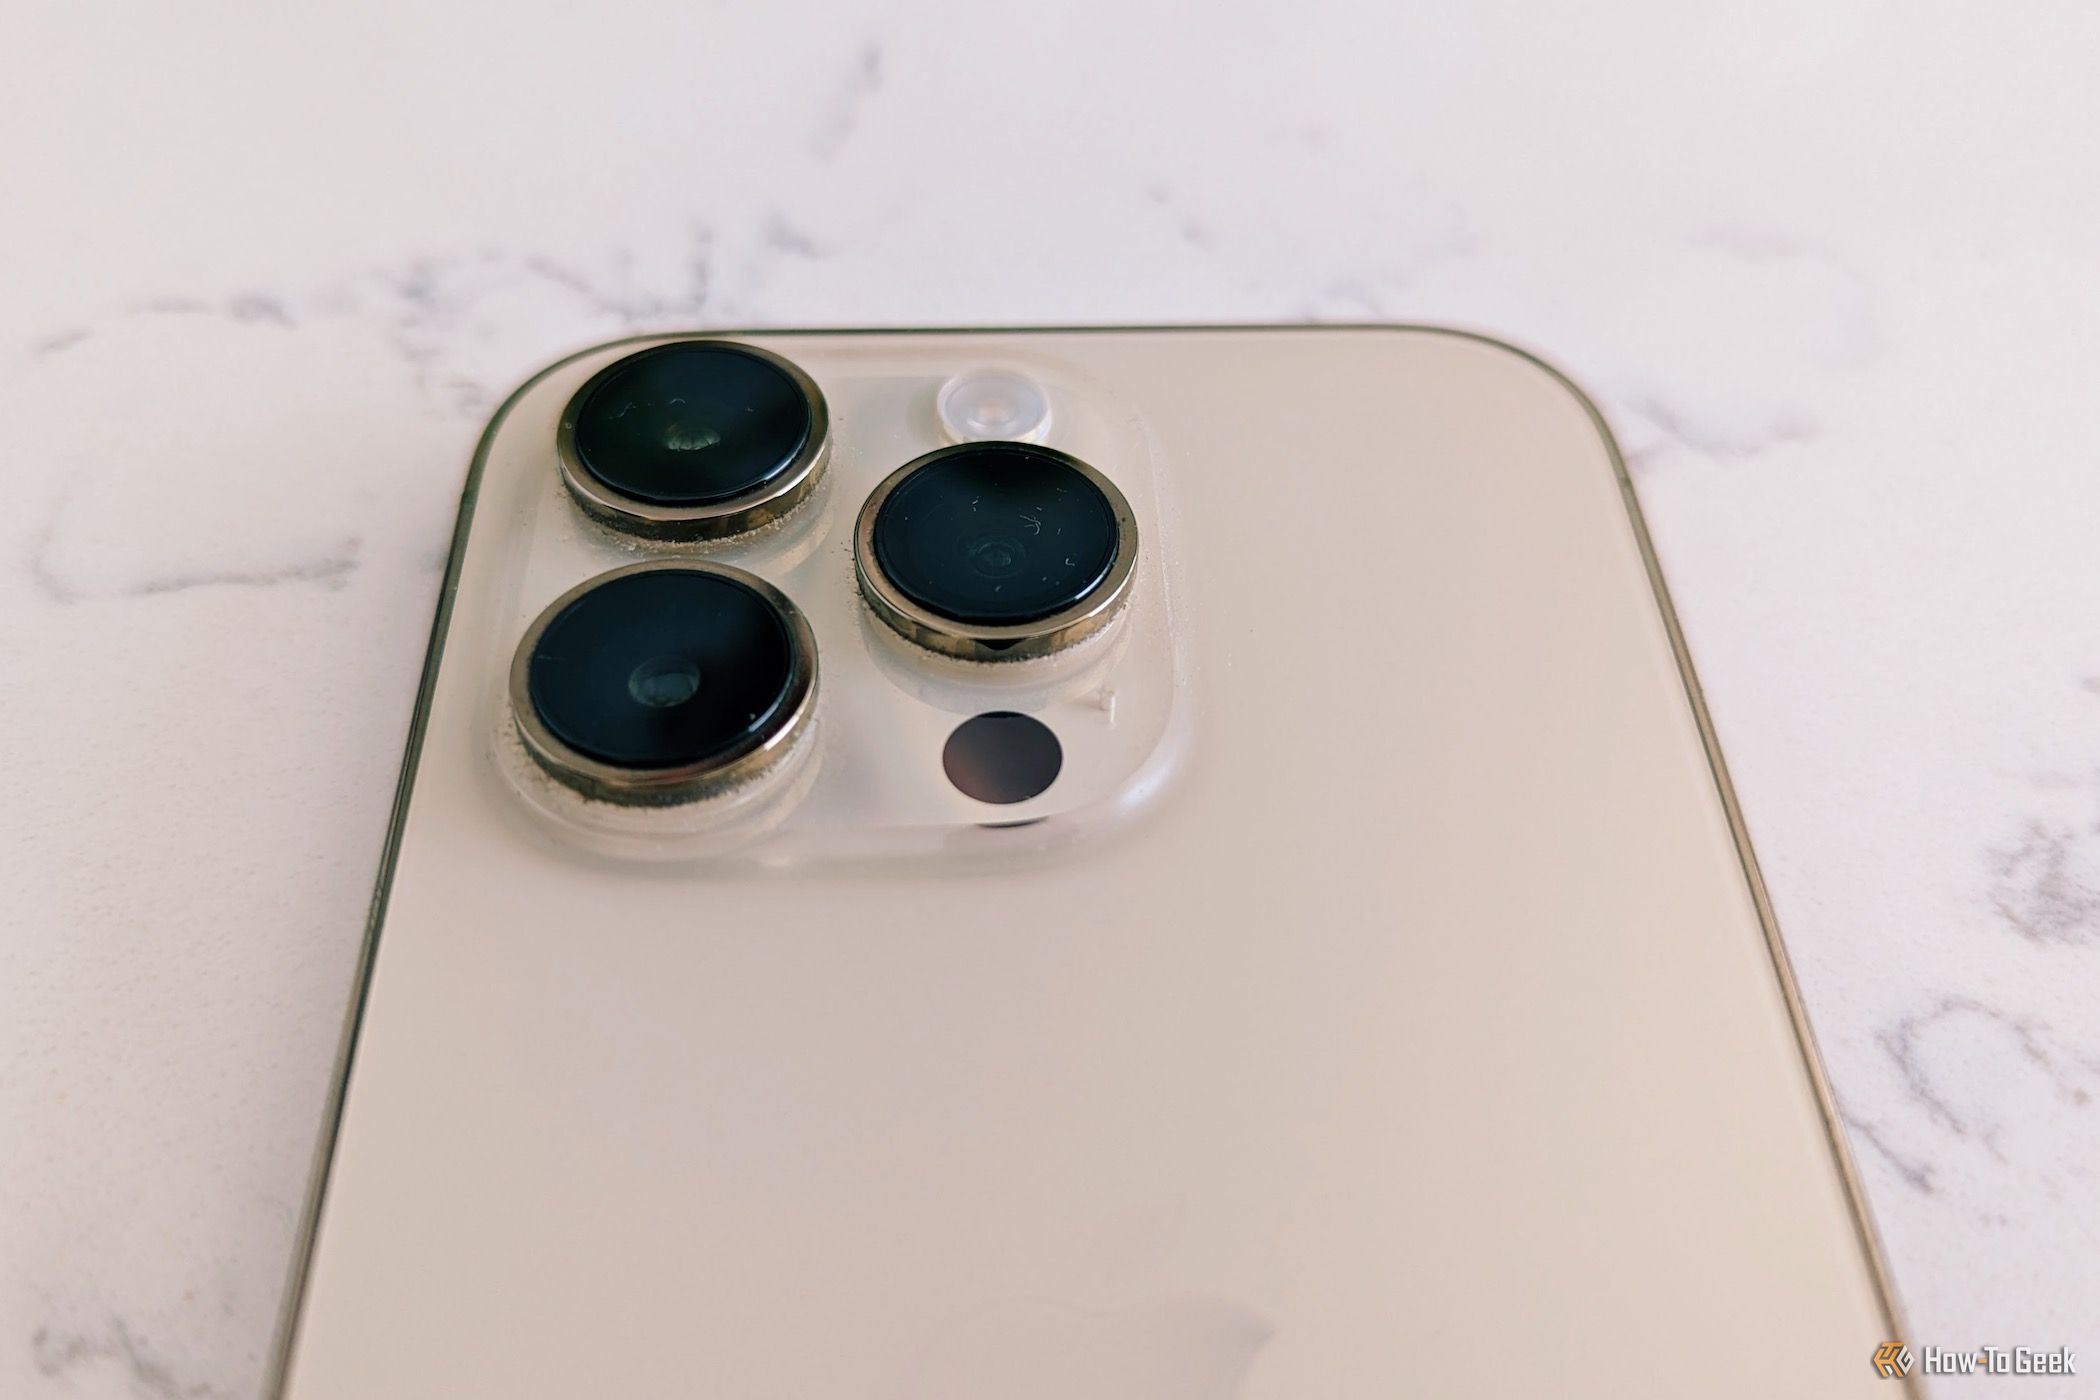 Back of the iPhone 14 Pro showing the cameras